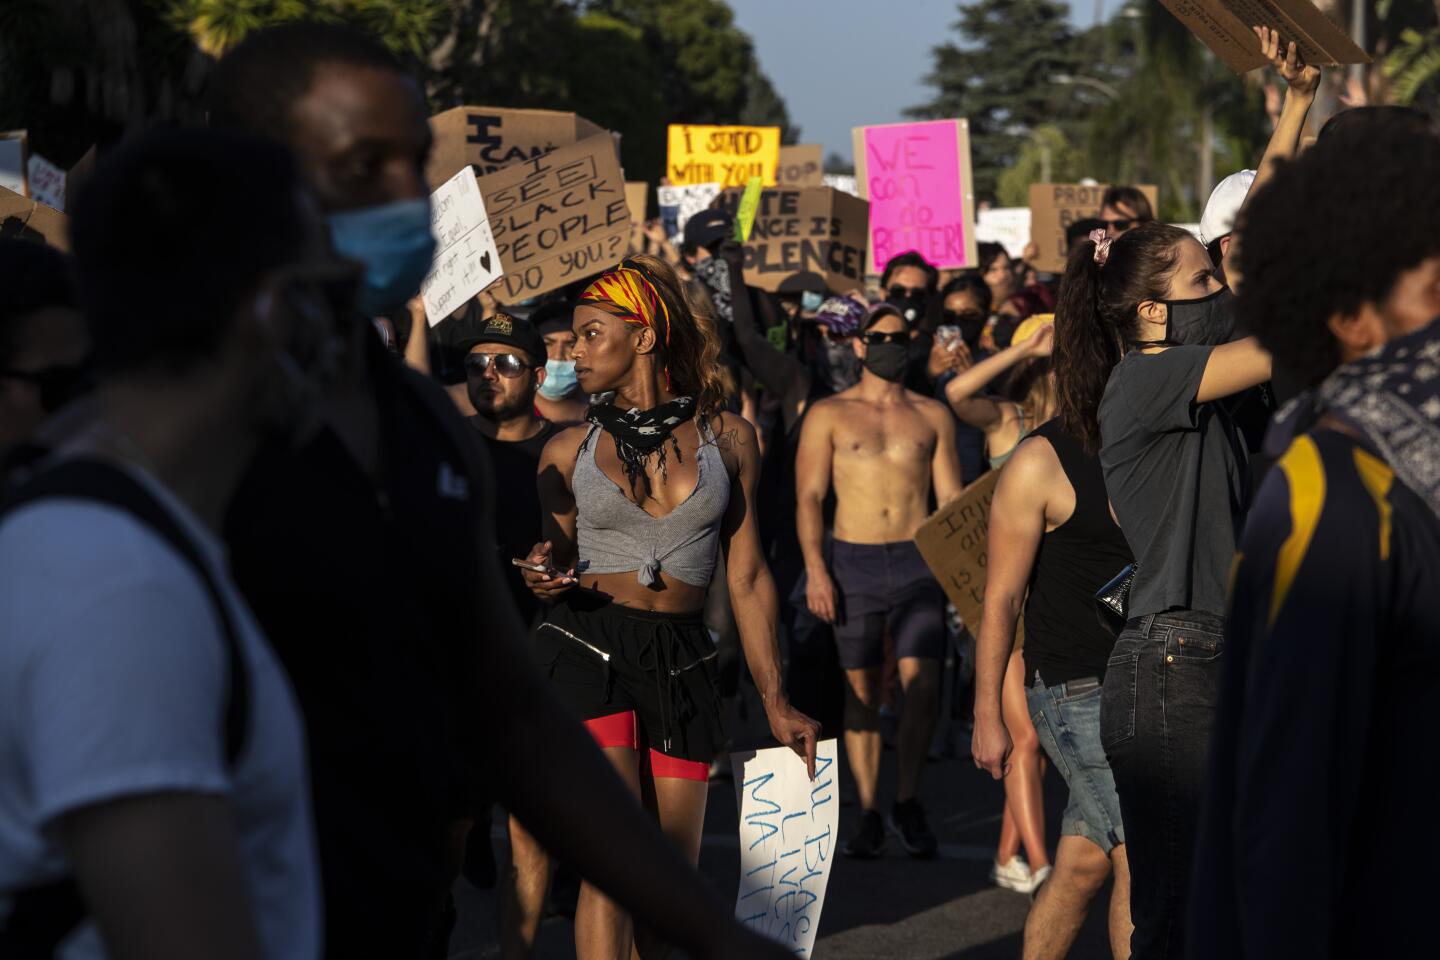 Protesters walk through a residential neighborhood in Hollywood.